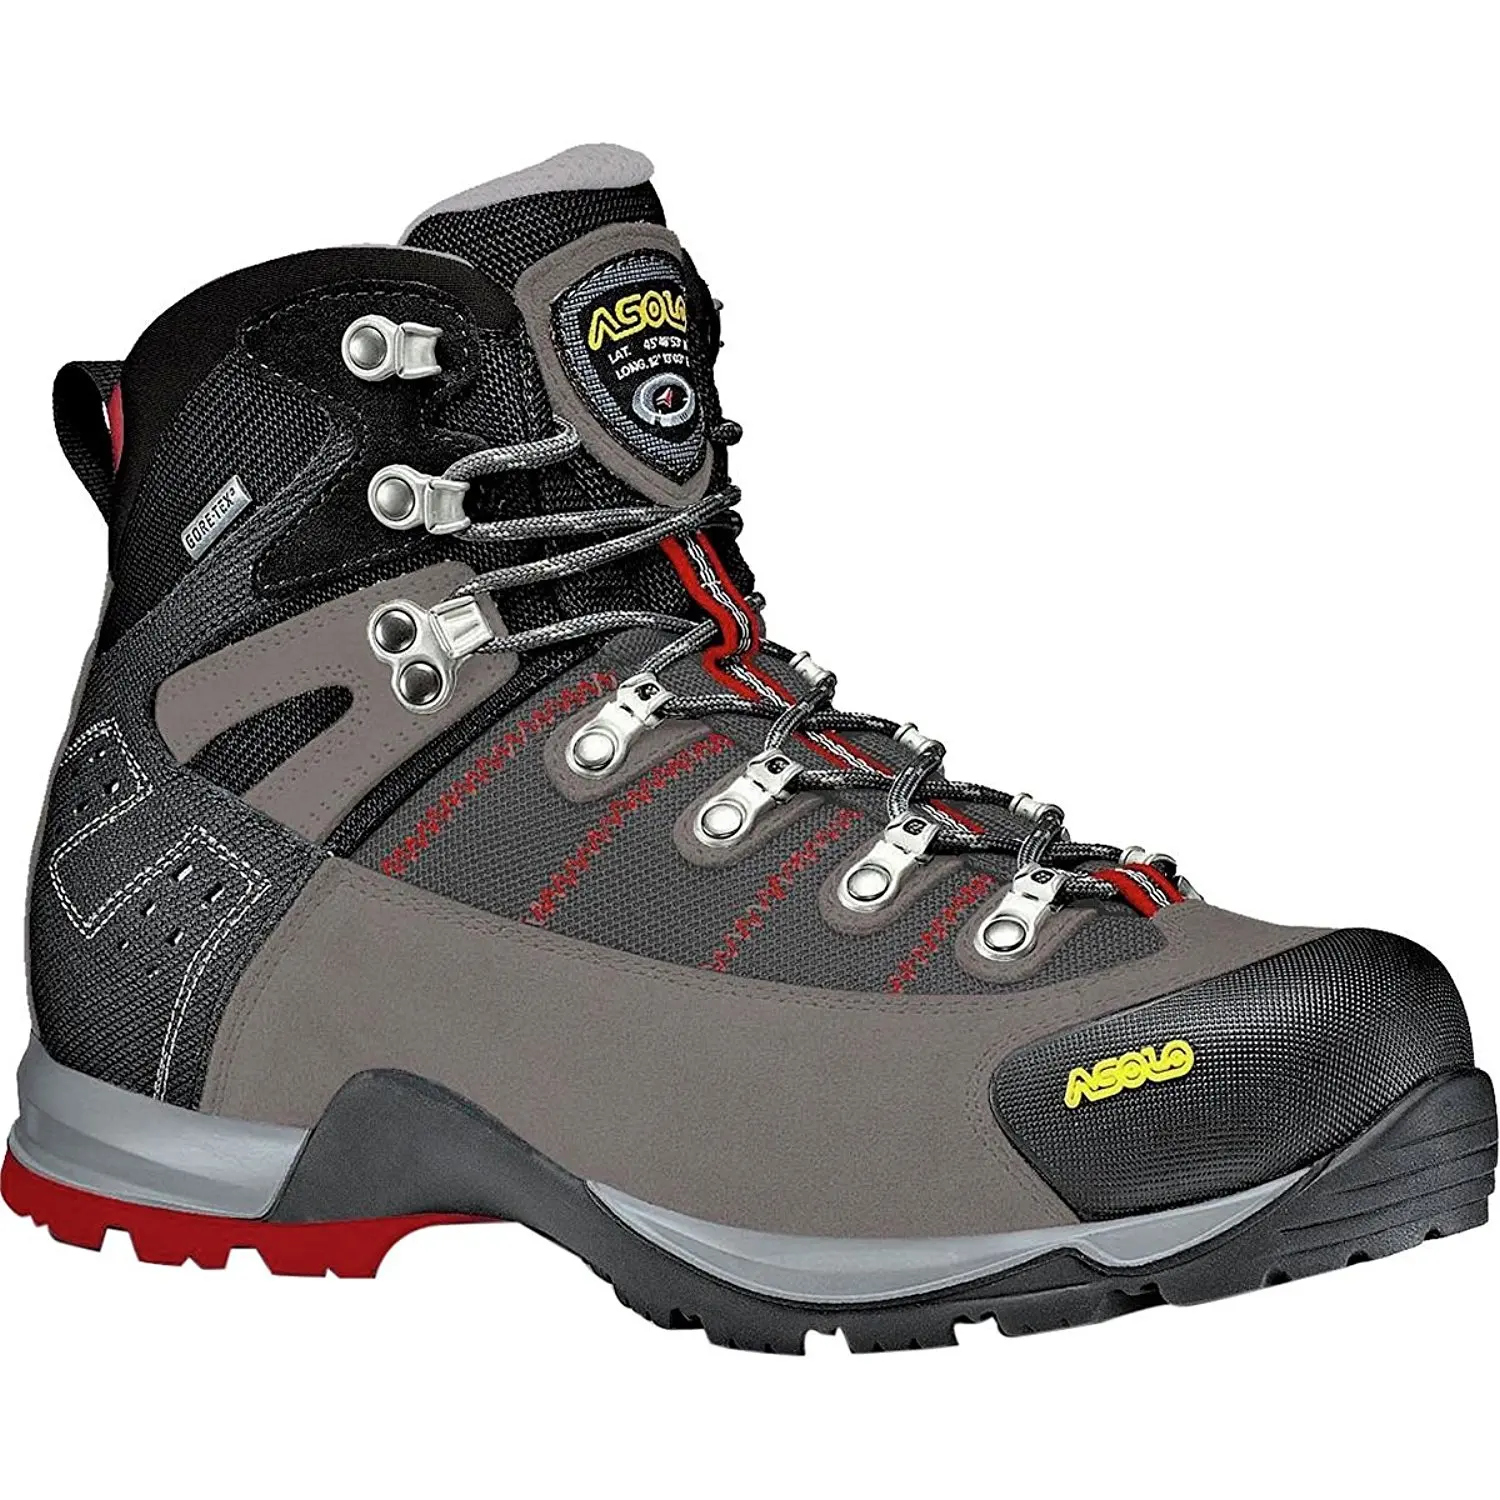 Cheap Asolo Hiking Boots Clearance 